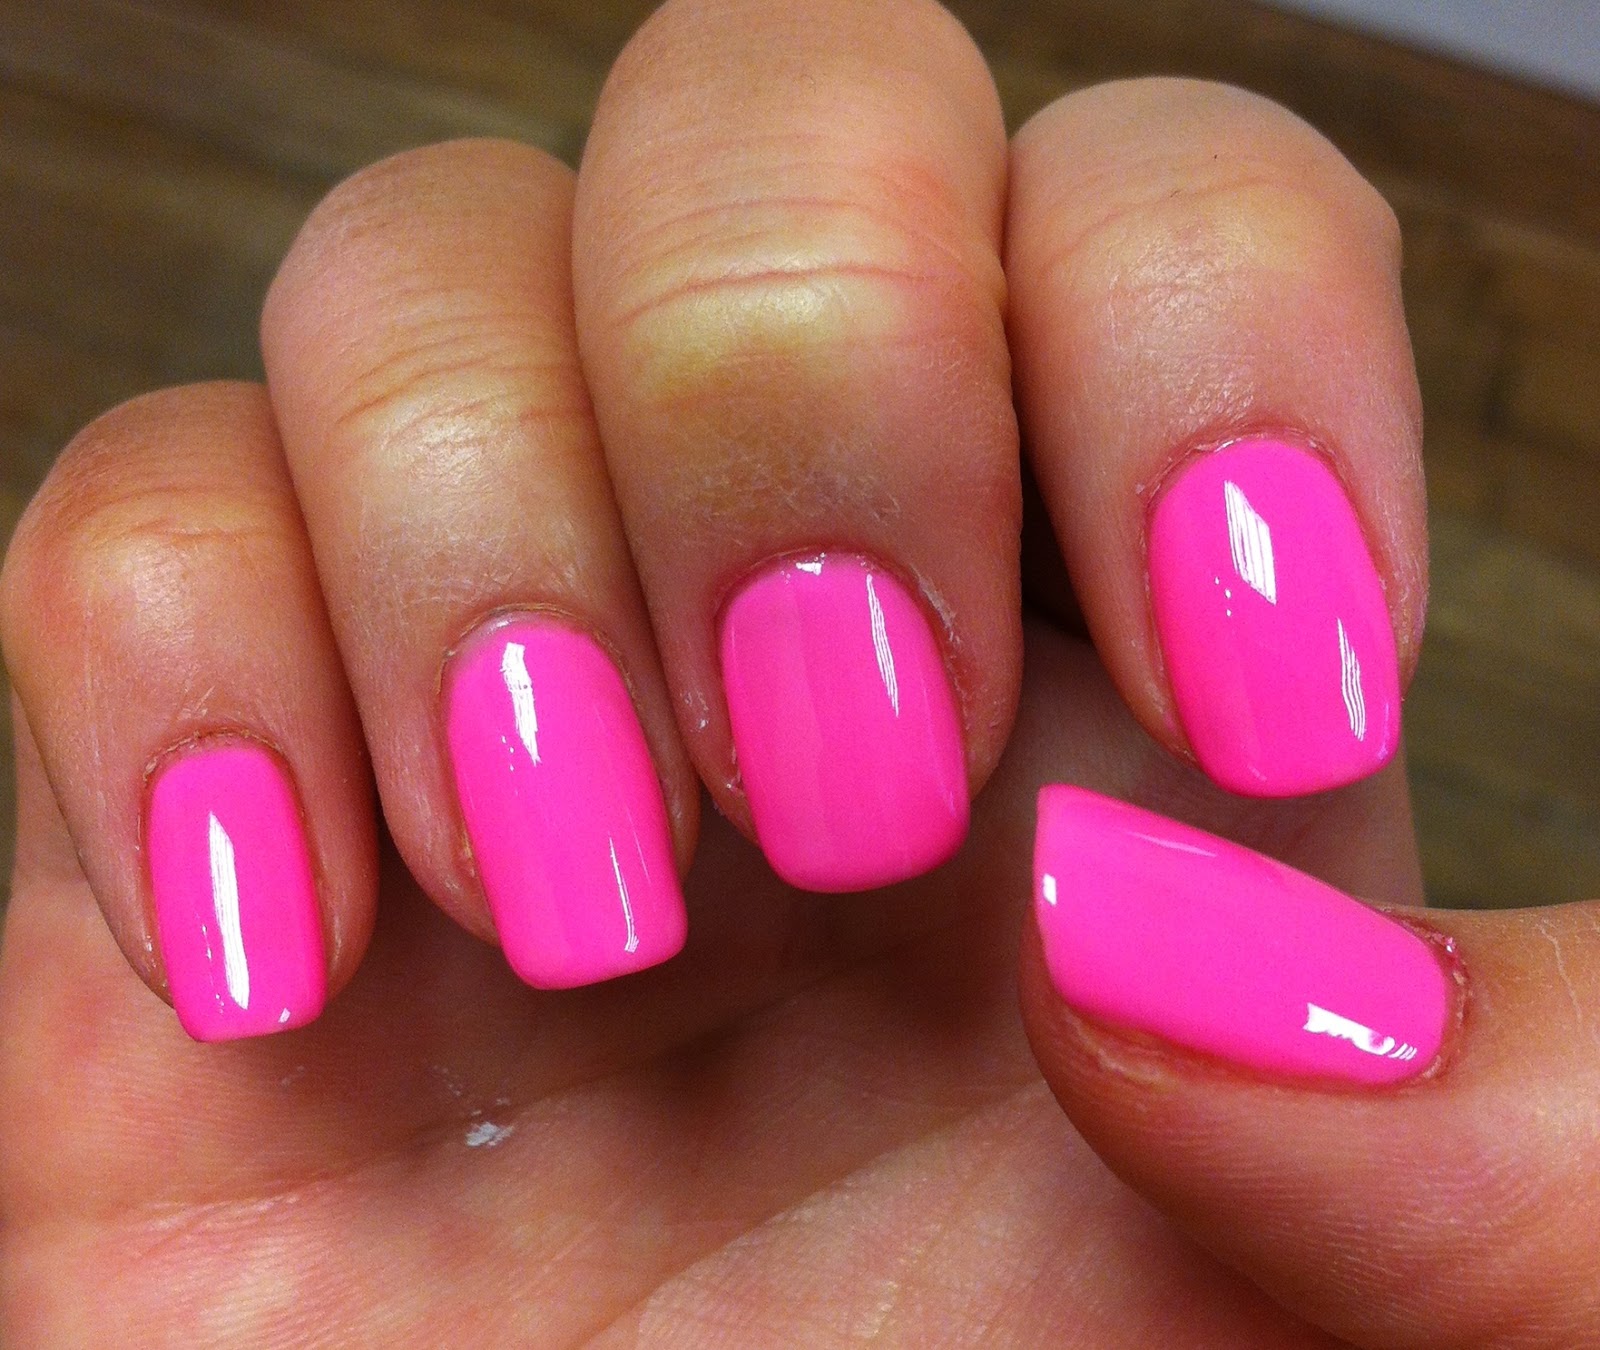 iBeautyBoutique Nail Of The Day Gelish Make You Blink Pink